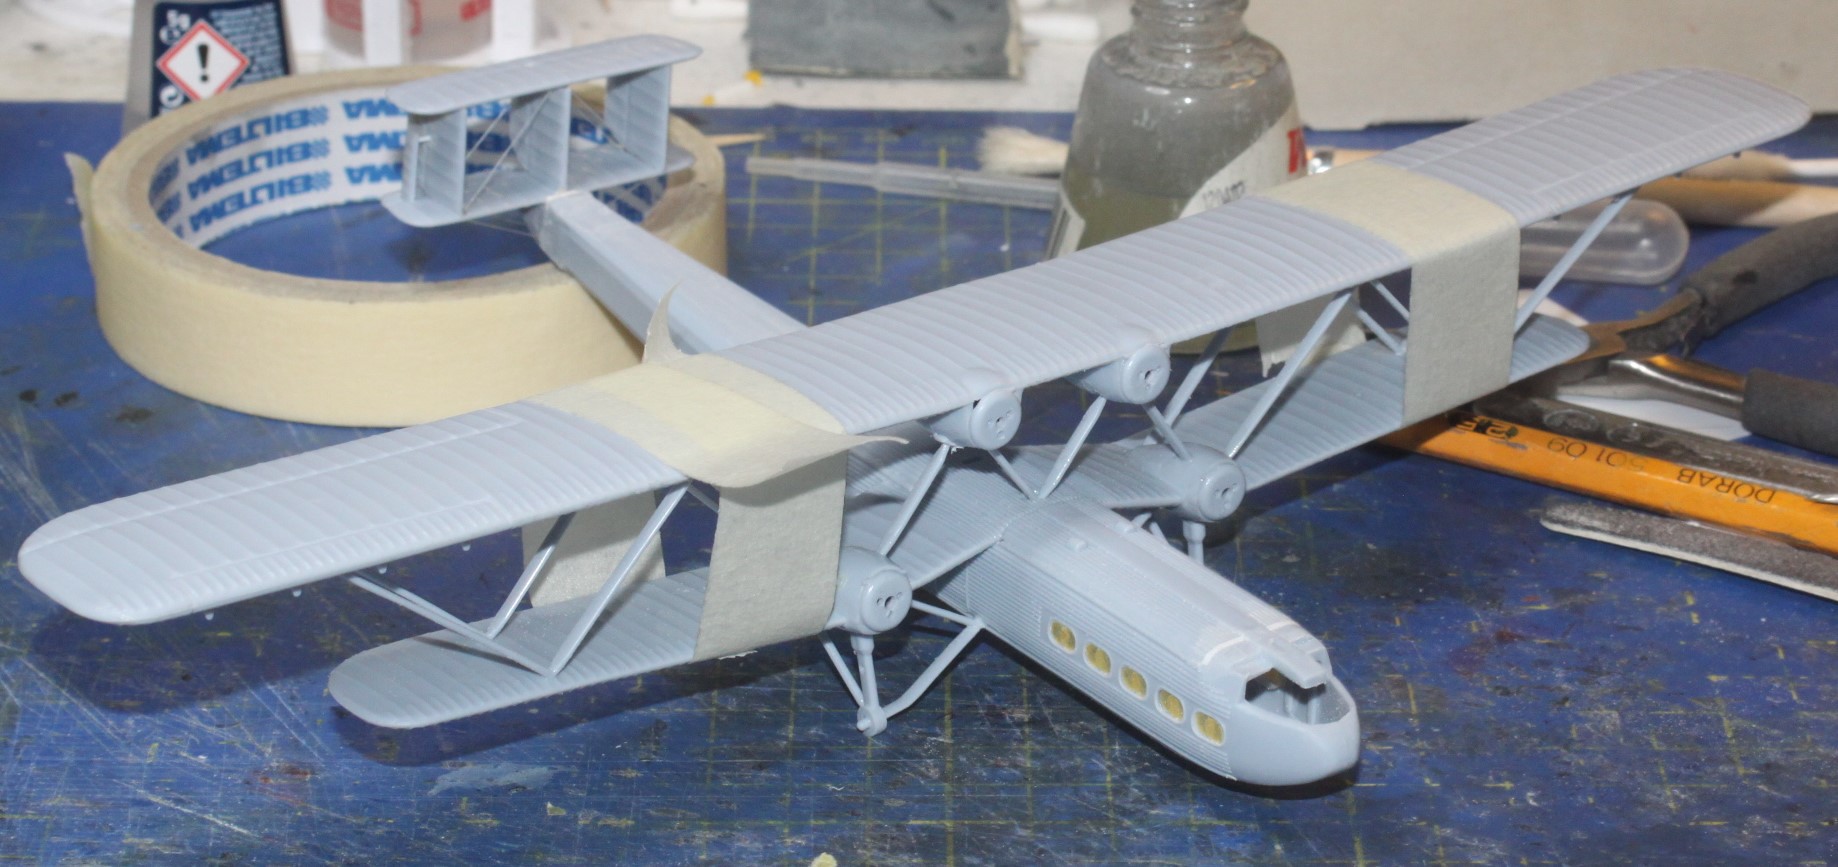 Handley Page H.P.42 "Heracles", Airfix 1.144 51960866432_52e6052438_k